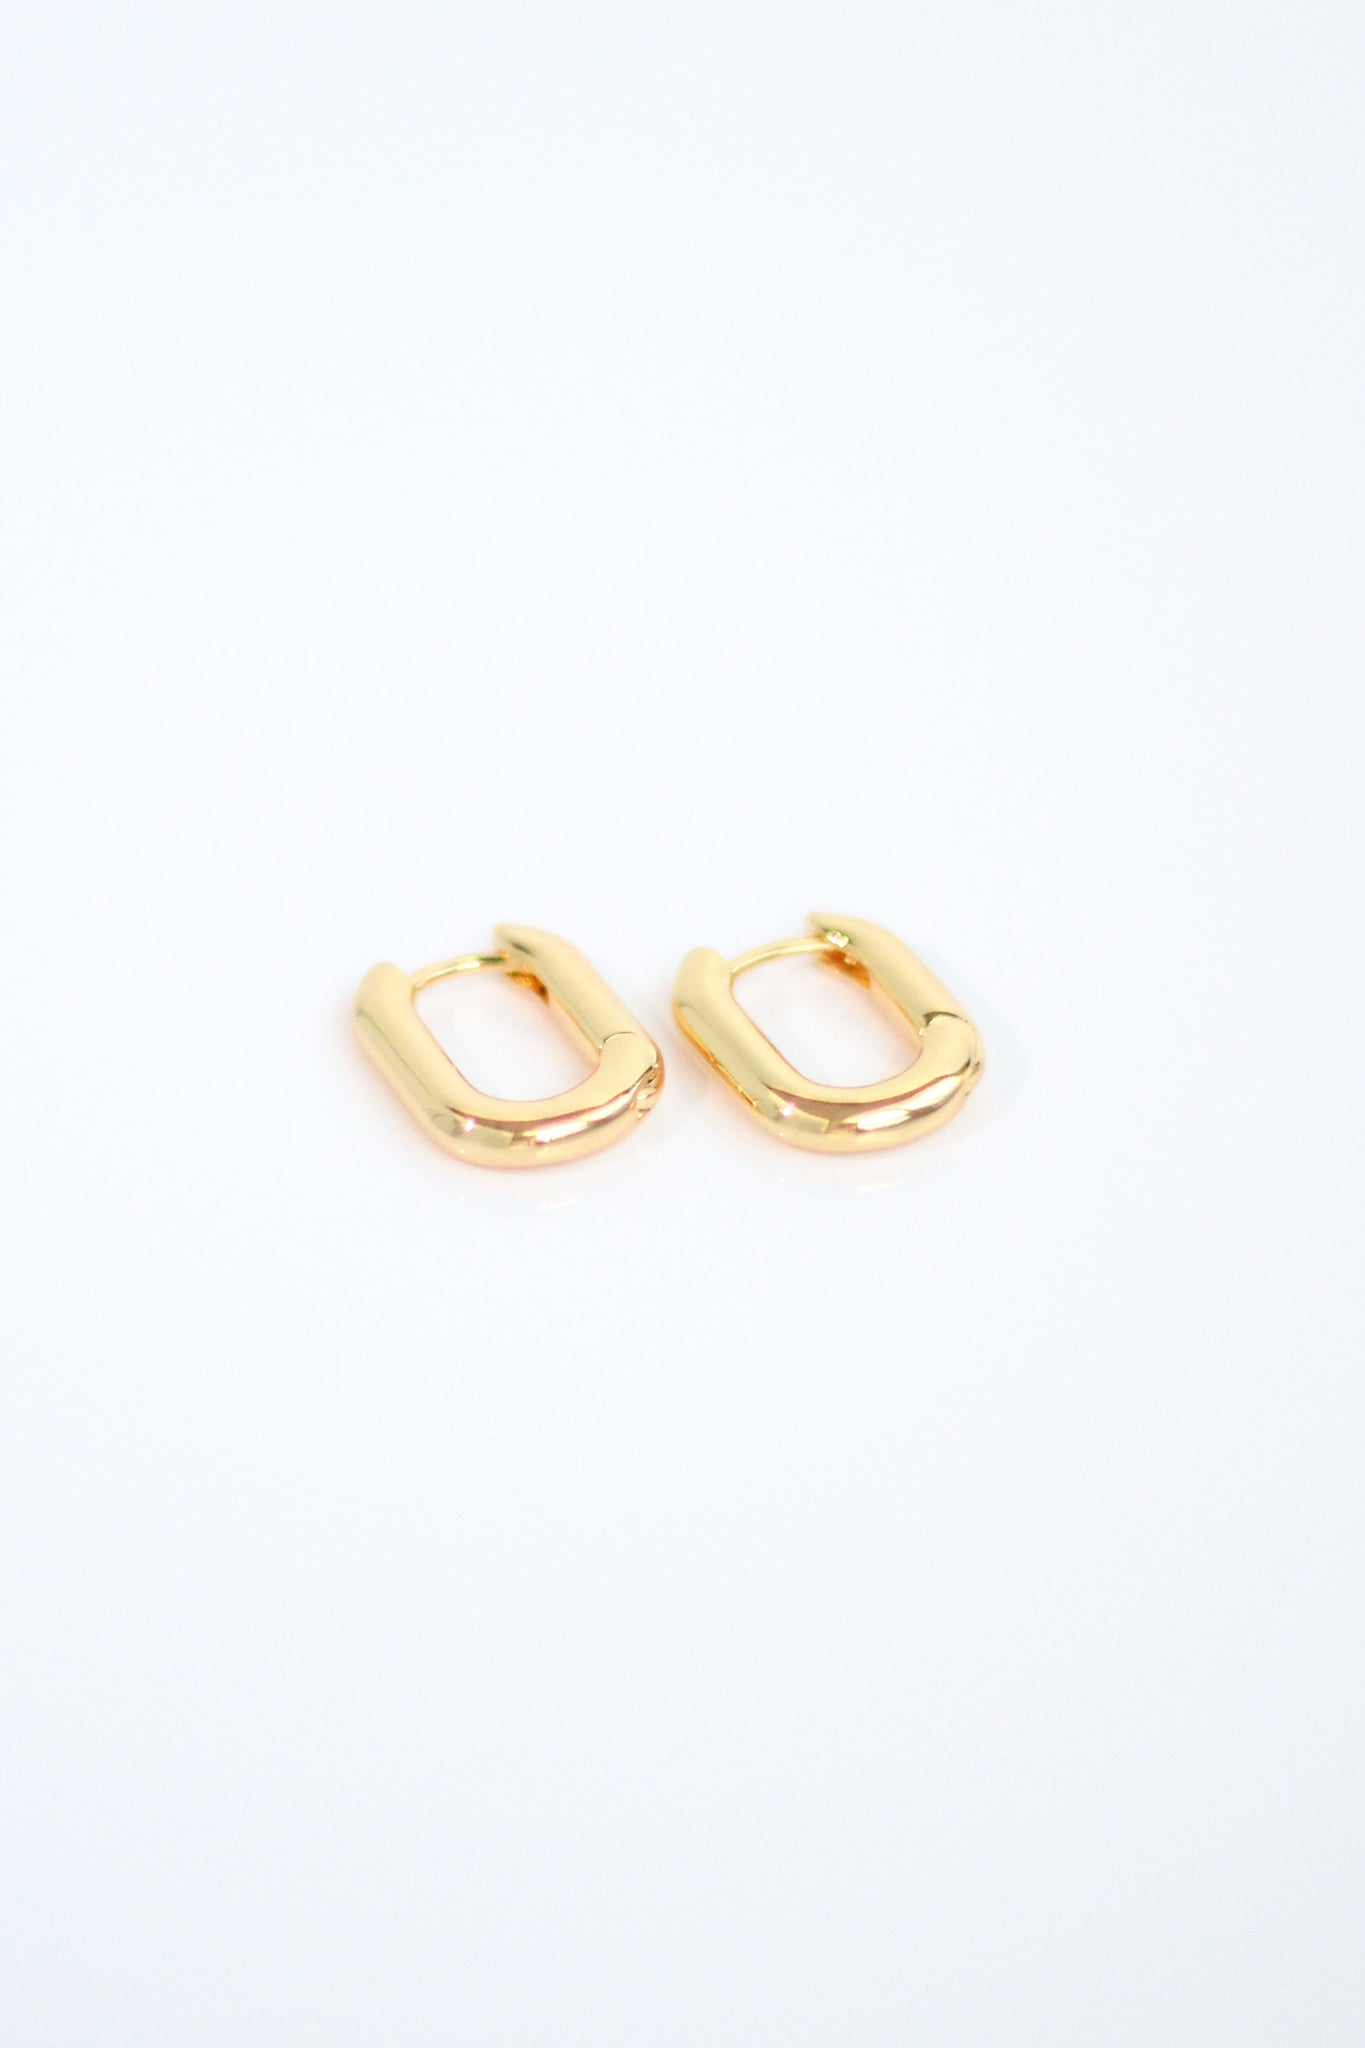 Small U Hoop Huggie Earrings. 18K Gold plated. From KADOU Boutique.